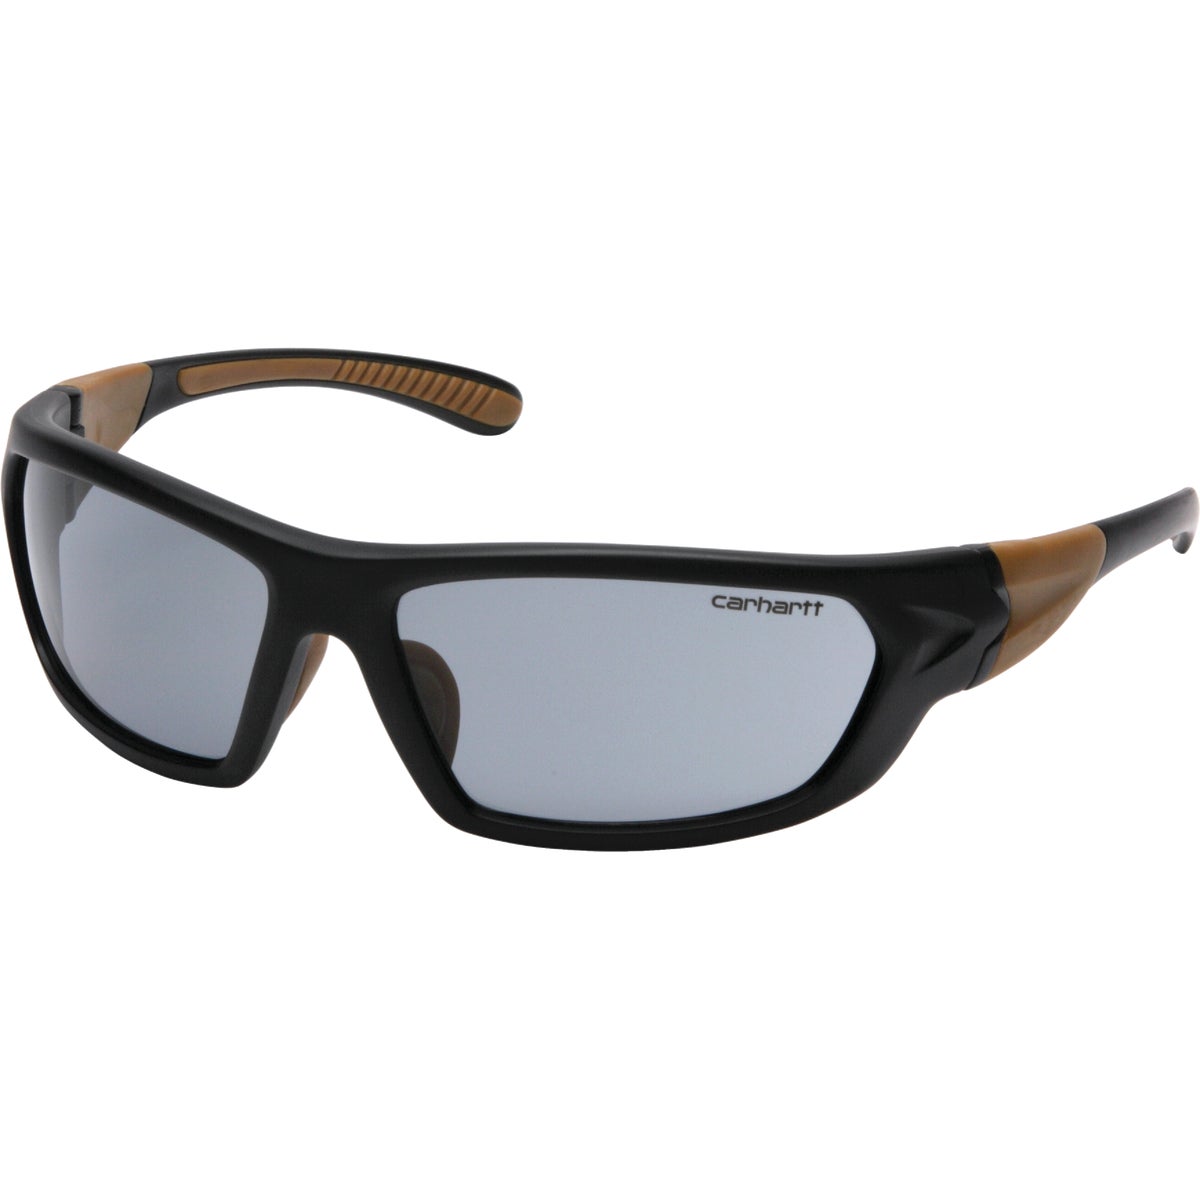 Carhartt Carbondale Black & Tan Frame Safety Glasses with Gray Lenses